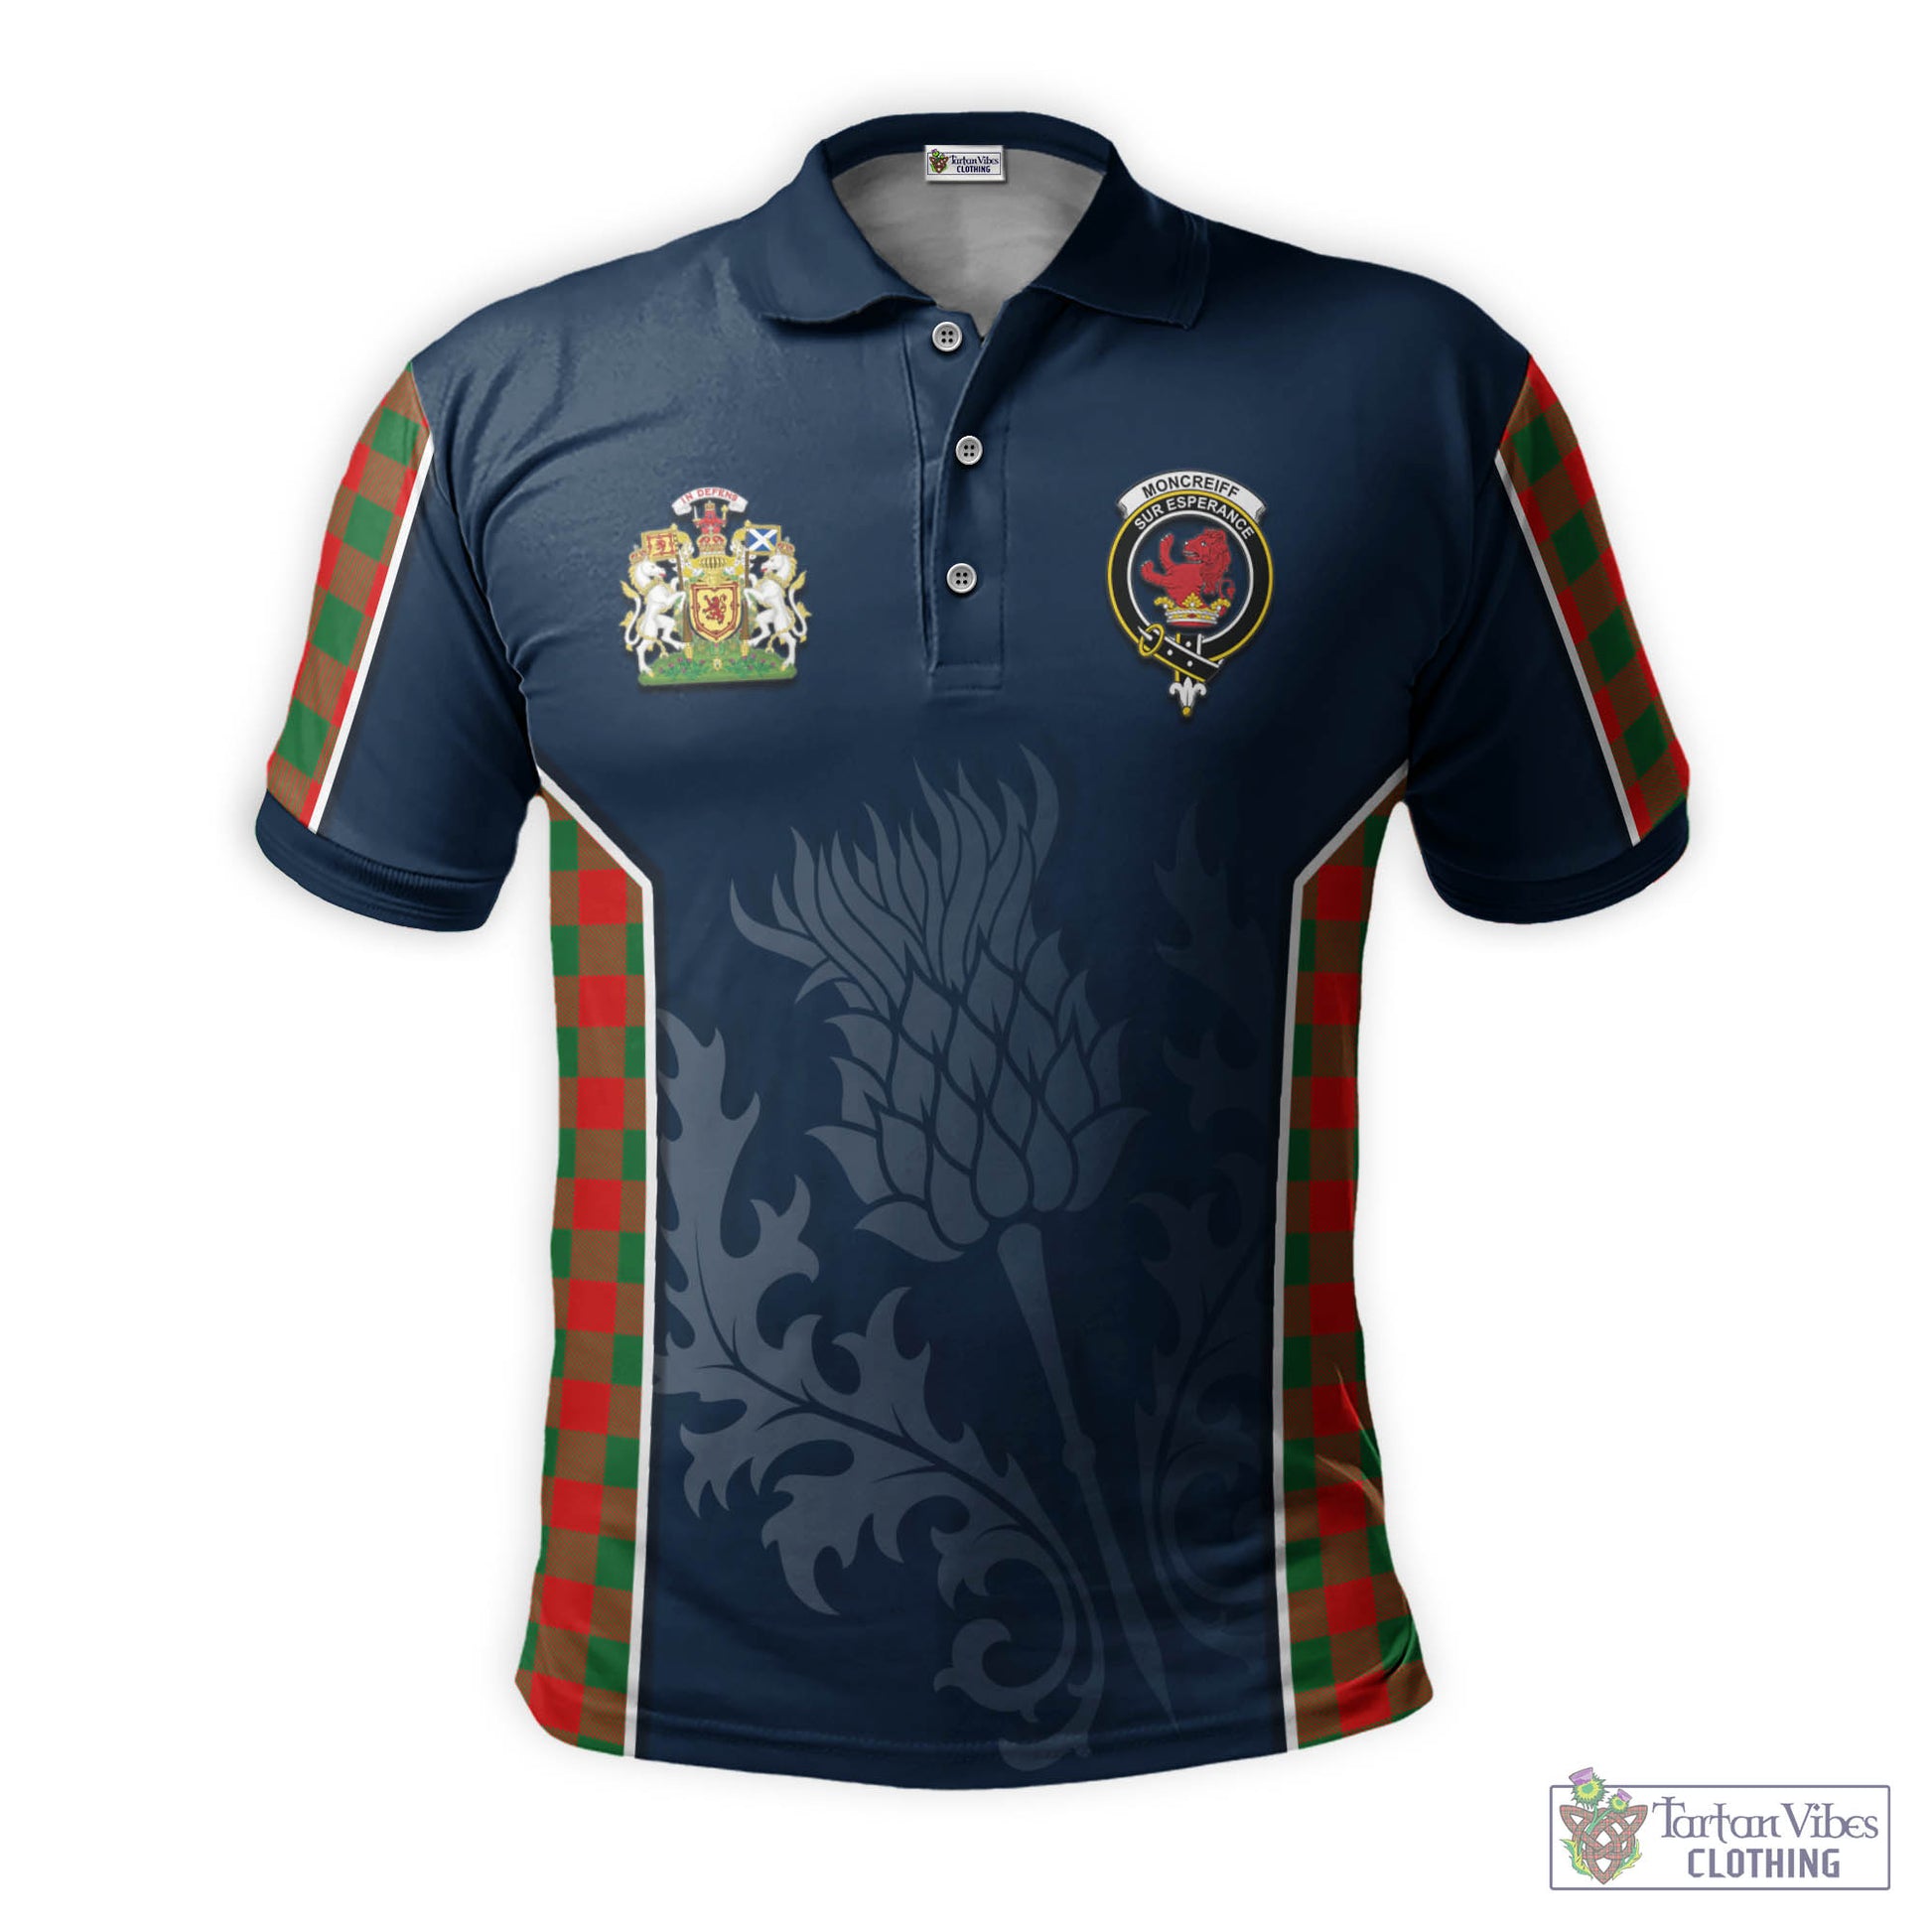 Tartan Vibes Clothing Moncrieff Modern Tartan Men's Polo Shirt with Family Crest and Scottish Thistle Vibes Sport Style